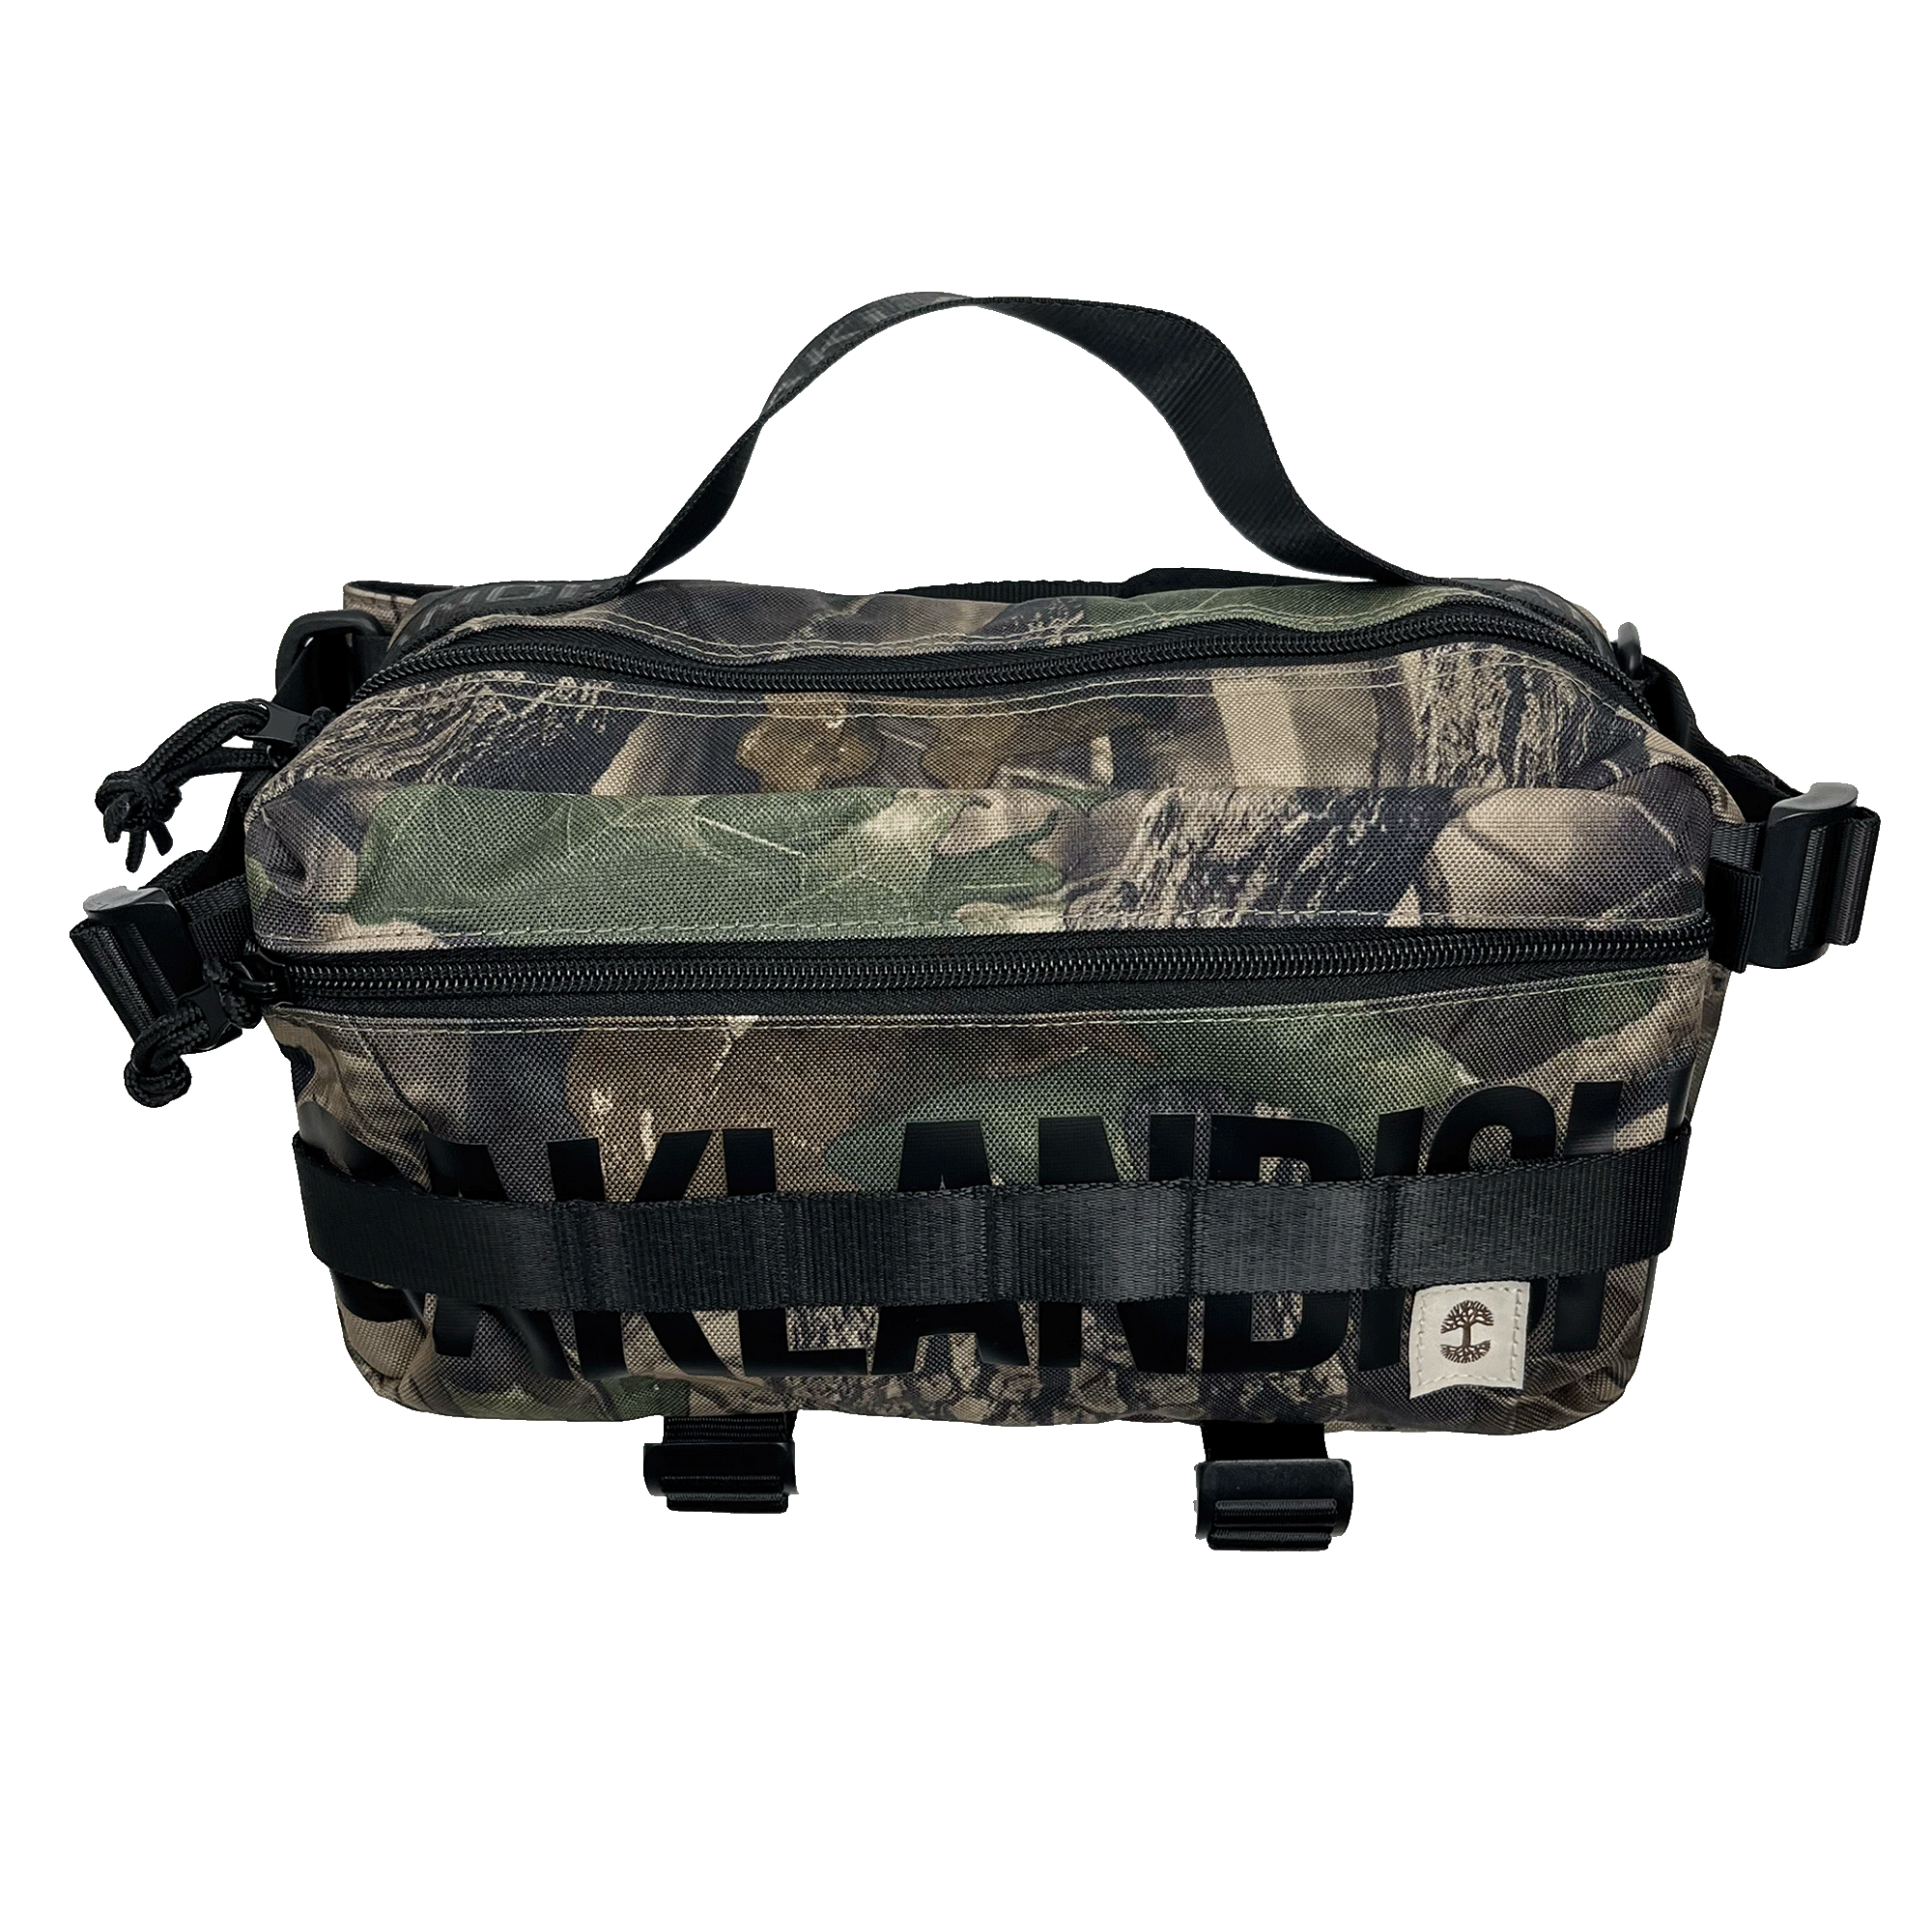 Front view of a camo patterned cross-body bag with front zipper, large black Oaklandish wordmark, and top handle.